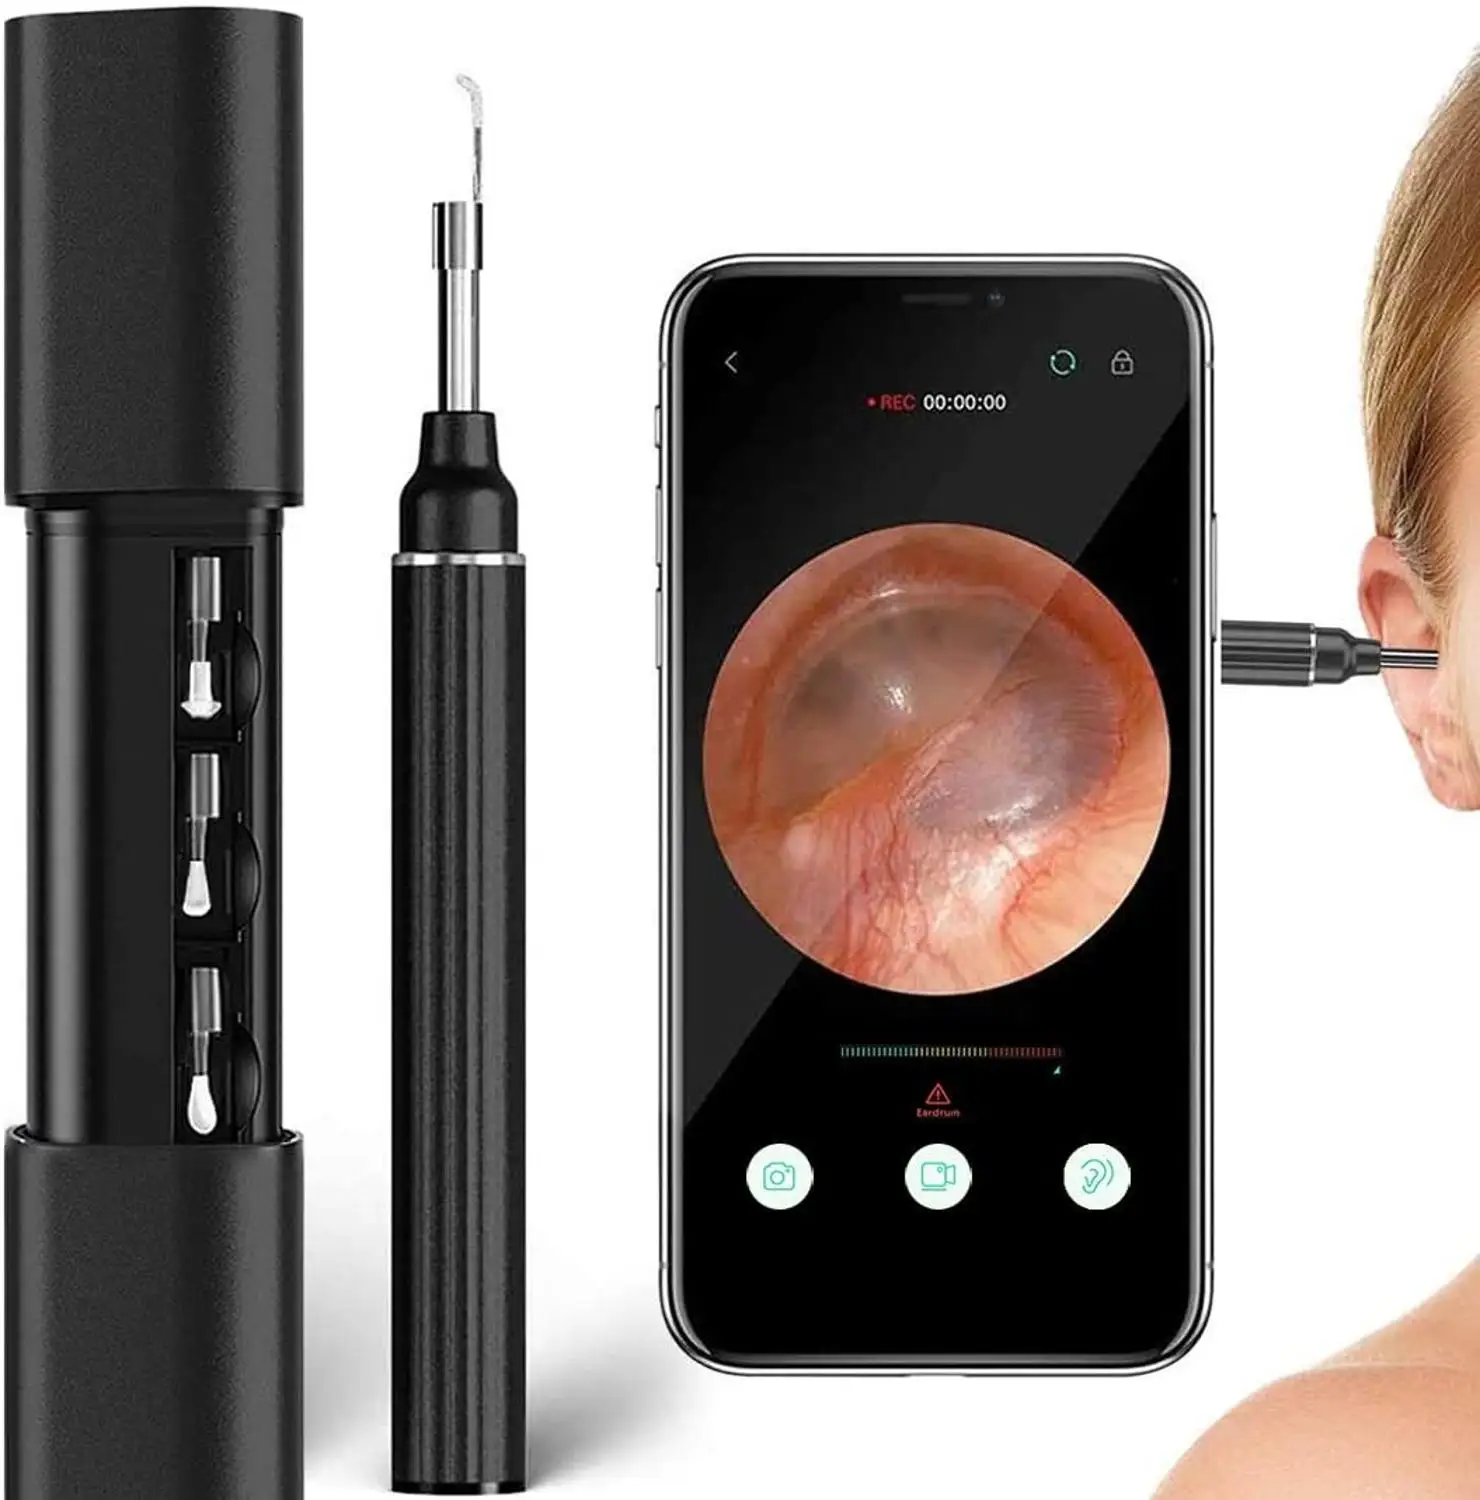 

3.9mm WiFi Ear Otoscope Wireless 5.0MP Digital Endoscope Ear Inspection Camera Earwax Cleaning Tool with 6 Led for IOS Android